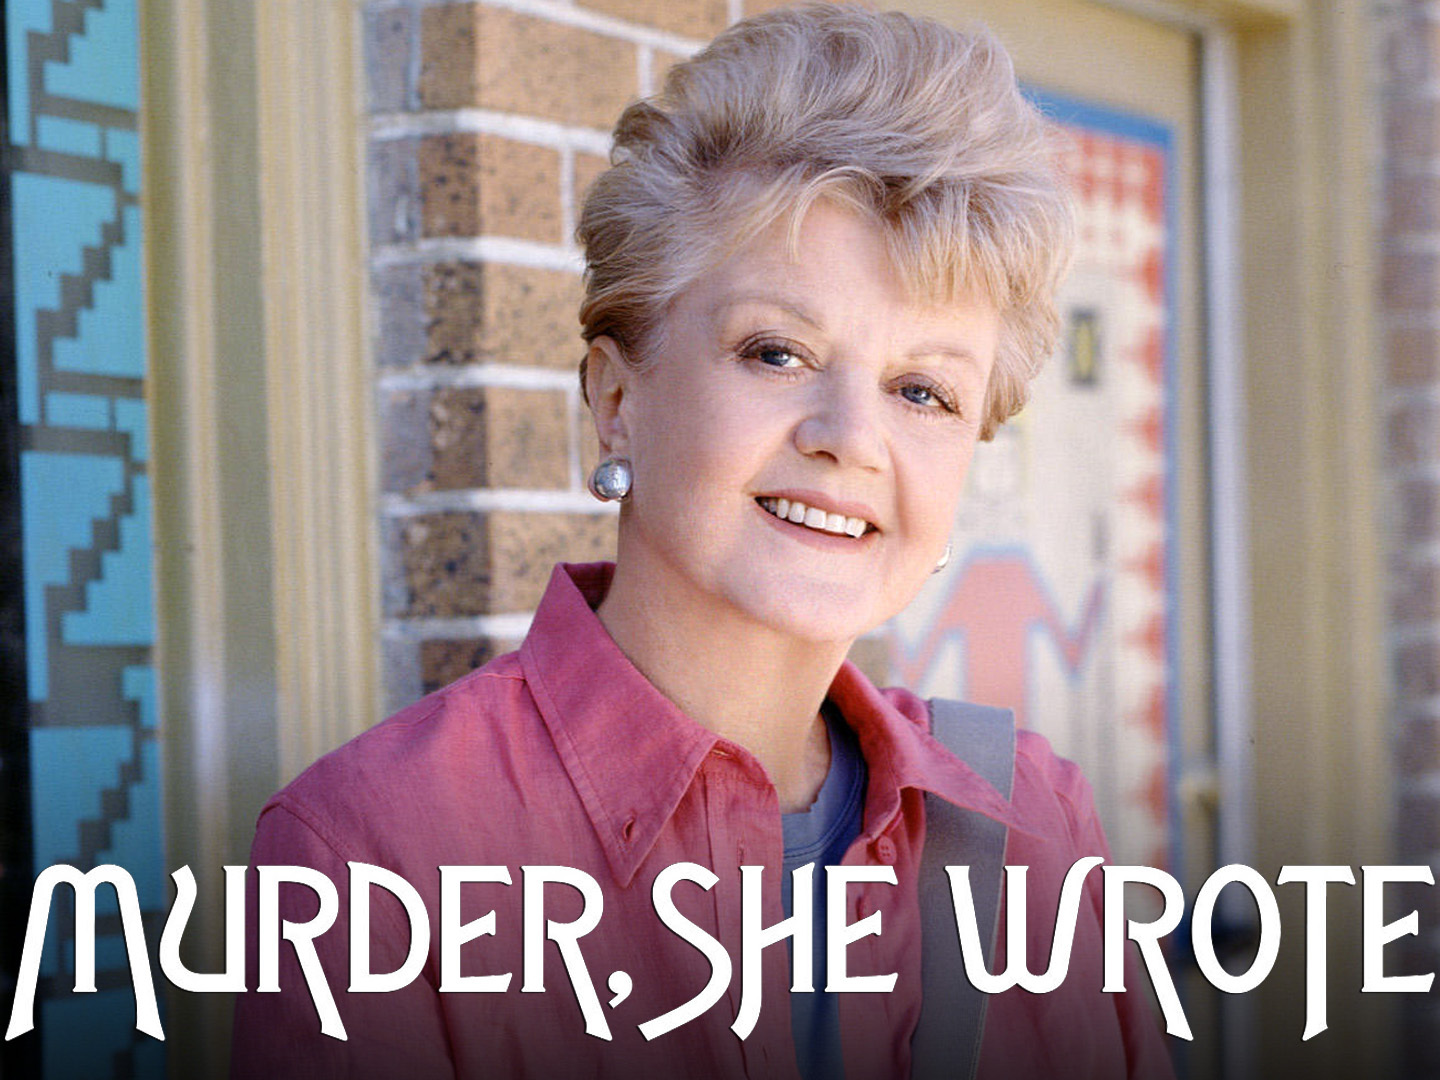 Angela Lansbury dies at 96 - Angela Lansbury, She wrote murder, Actors and actresses, Negative, Death